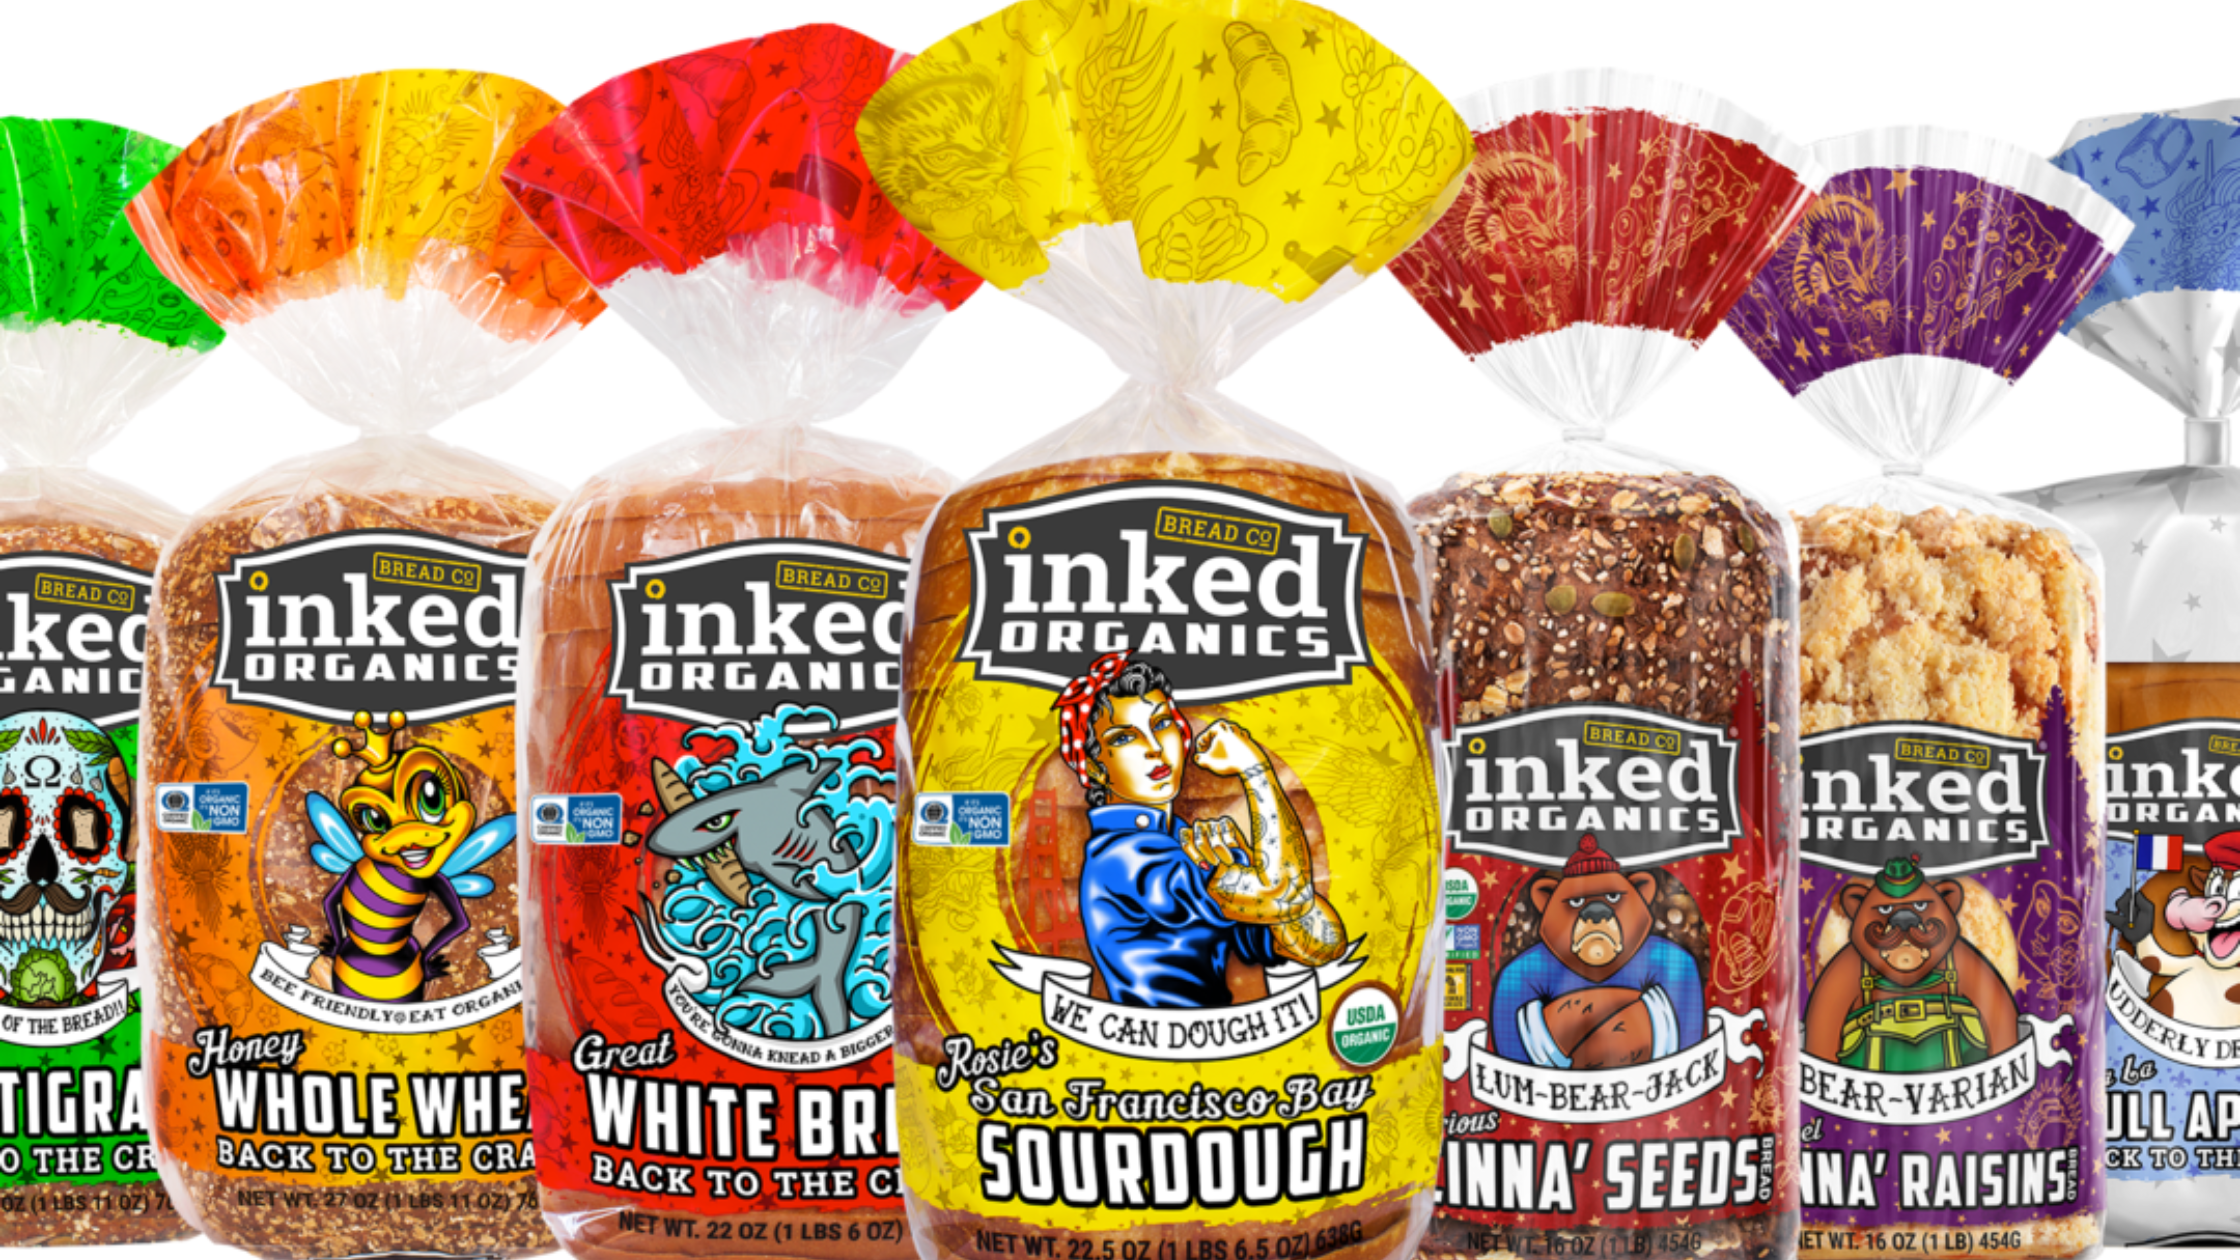 Inked Bread product lineup 